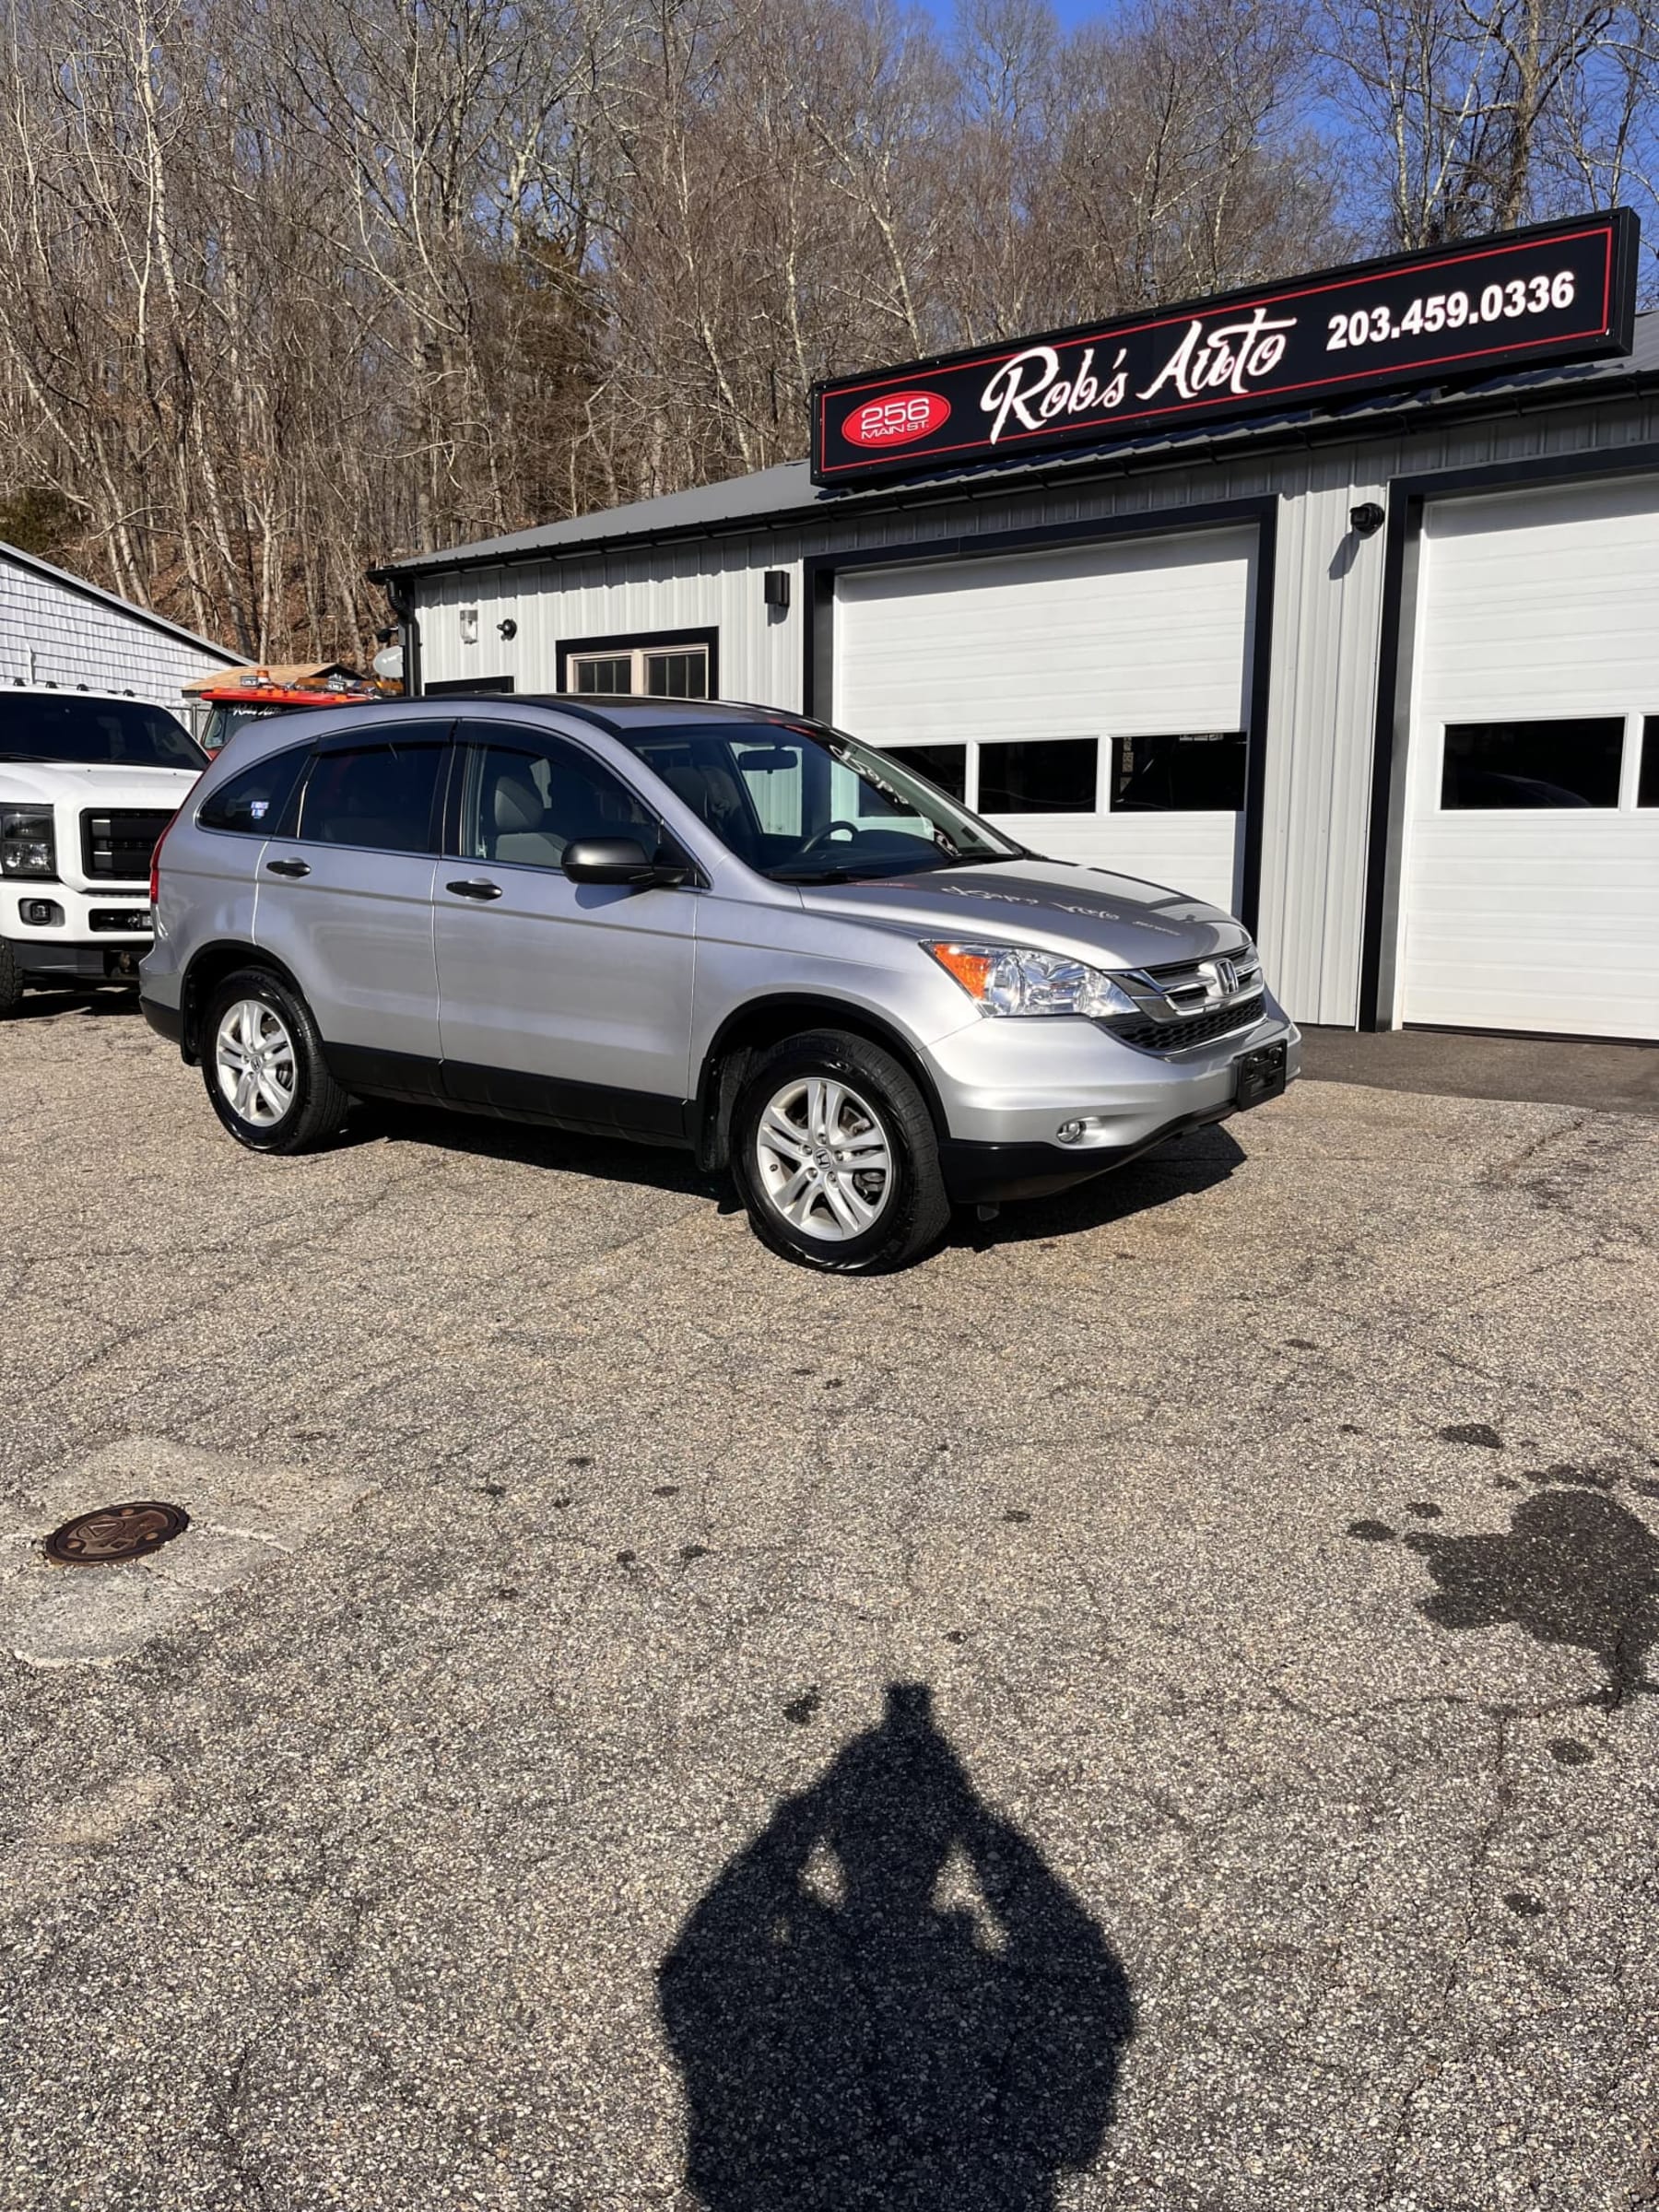 NEW ARRIVAL!! 2011 Honda CRV-EX!! Clean carfax! AWD! Moonroof! Runs and drives new!! ONLY 65k miles!! Won’t find a cleaner more reliable car at only $13,900! Won’t last!